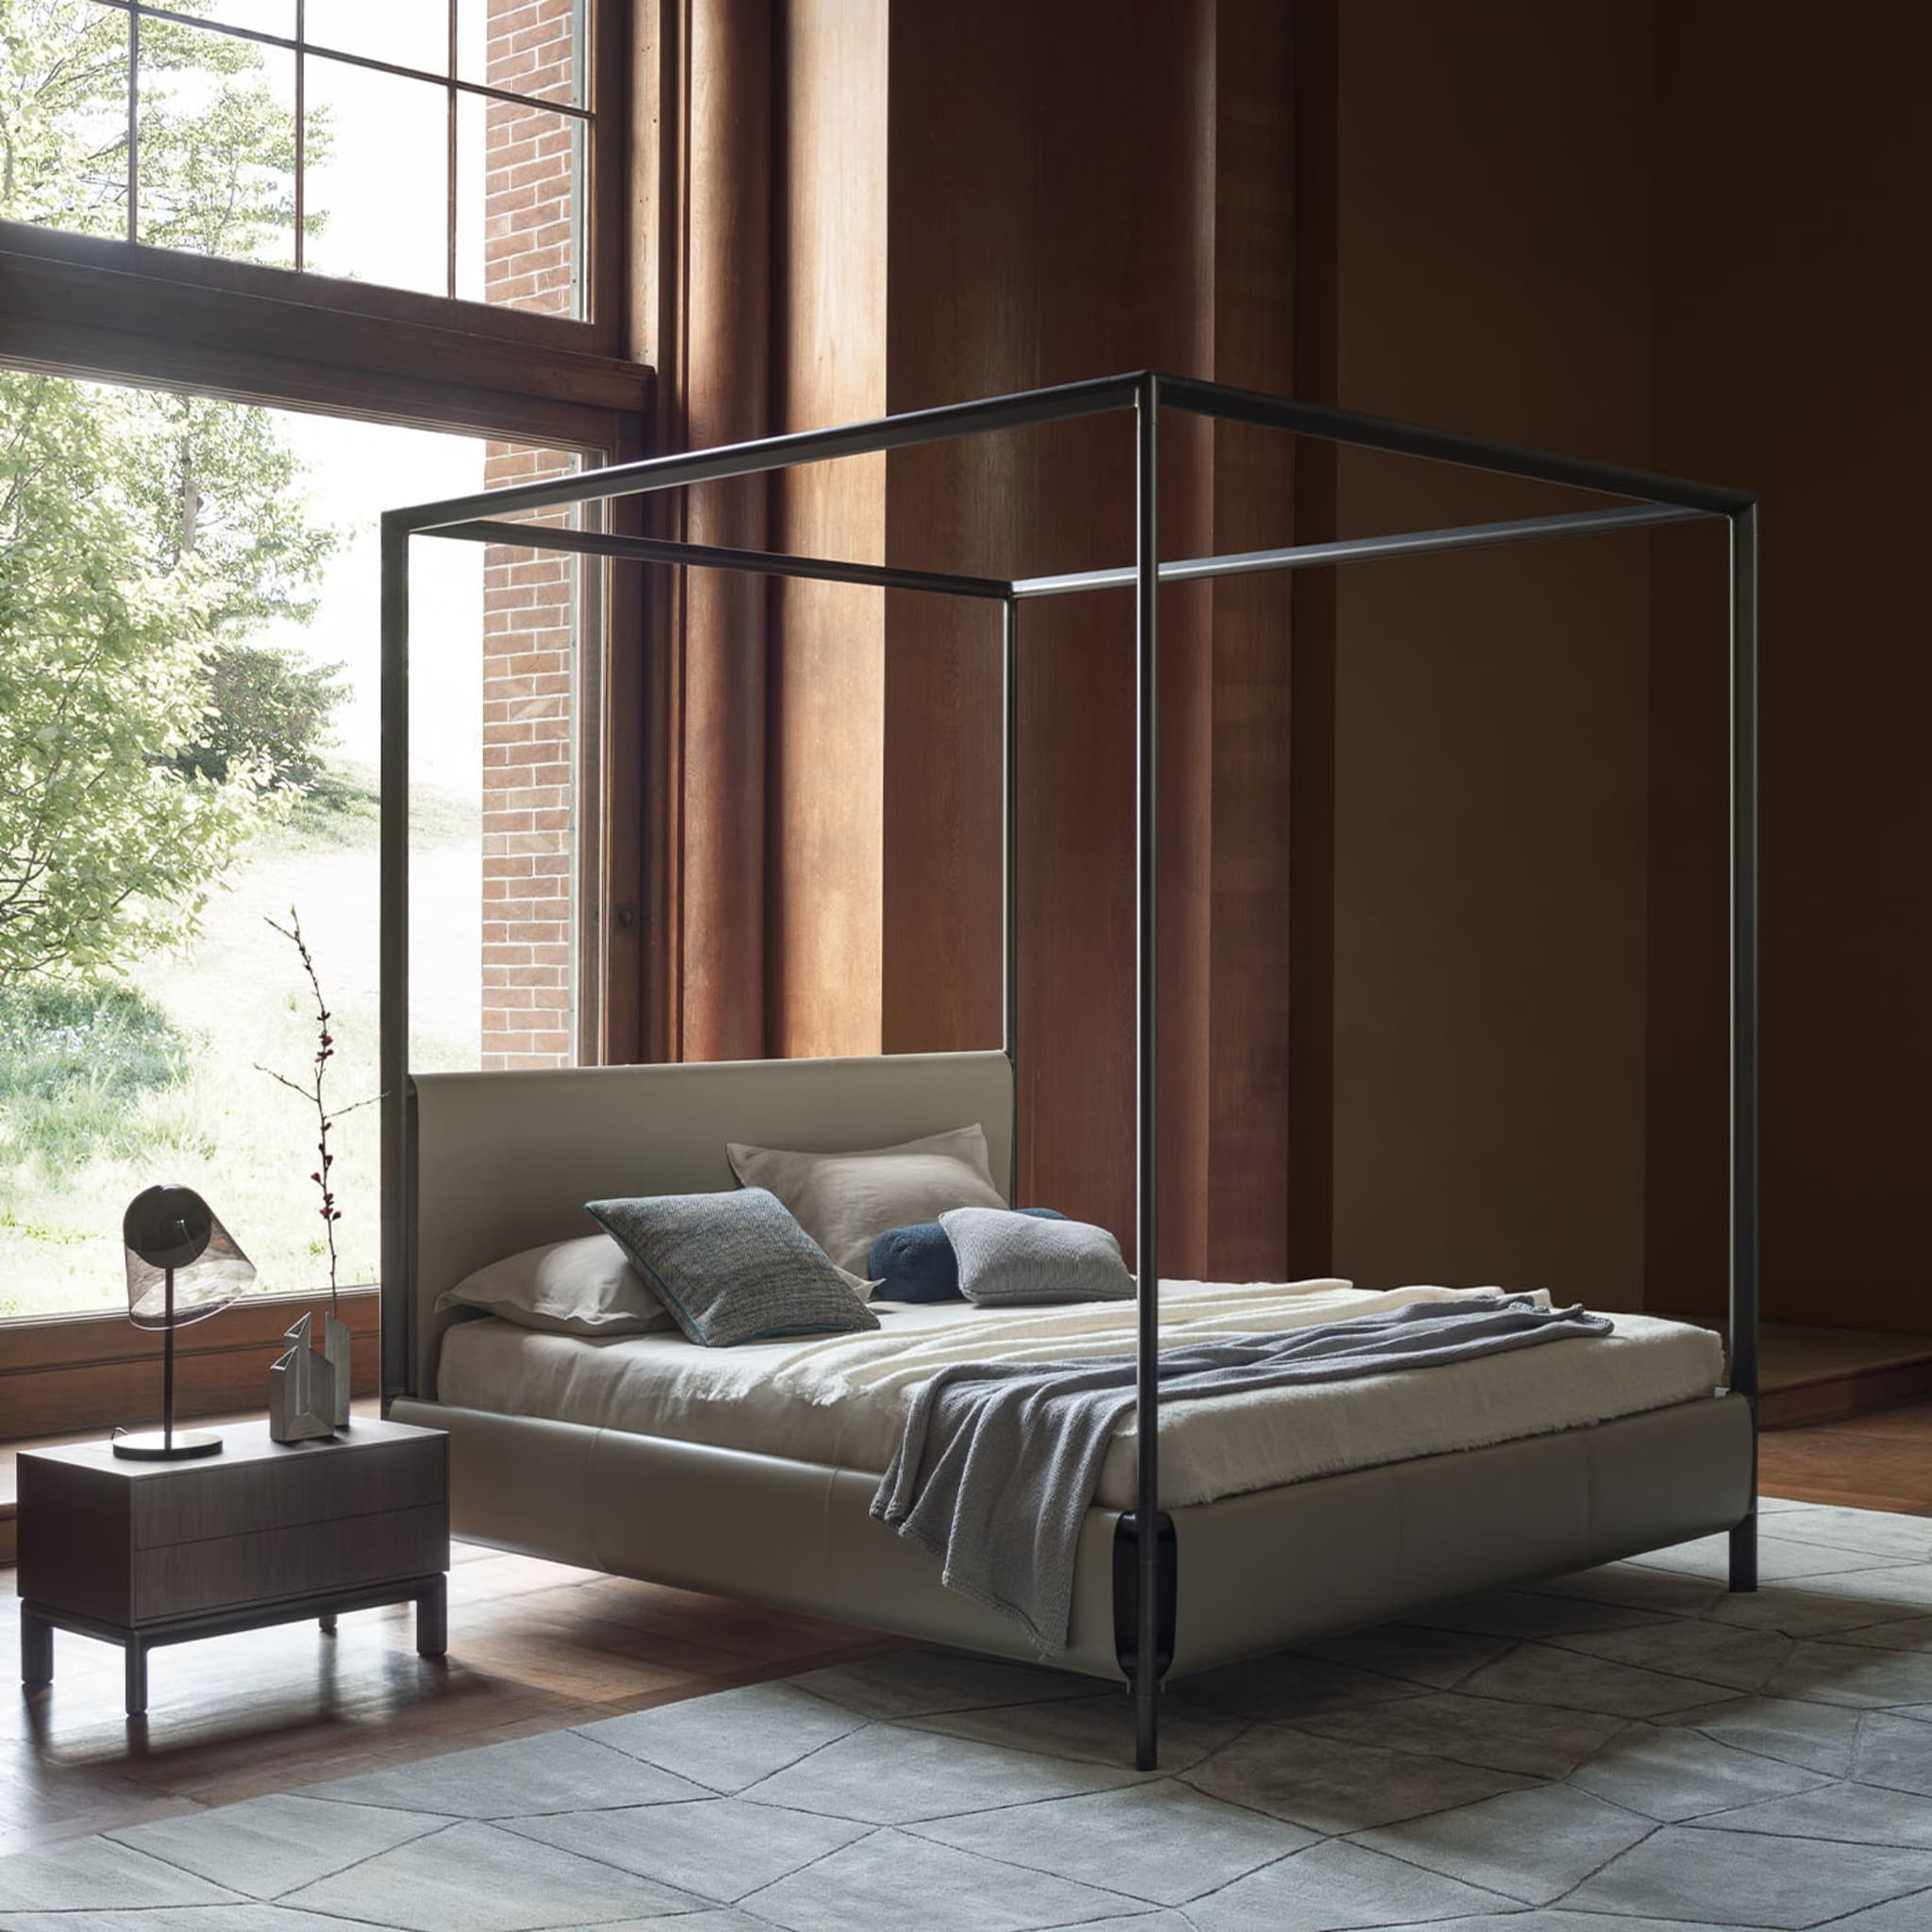 Frame Canopy Bed by Stefano Giovannoni - Alternative view 3